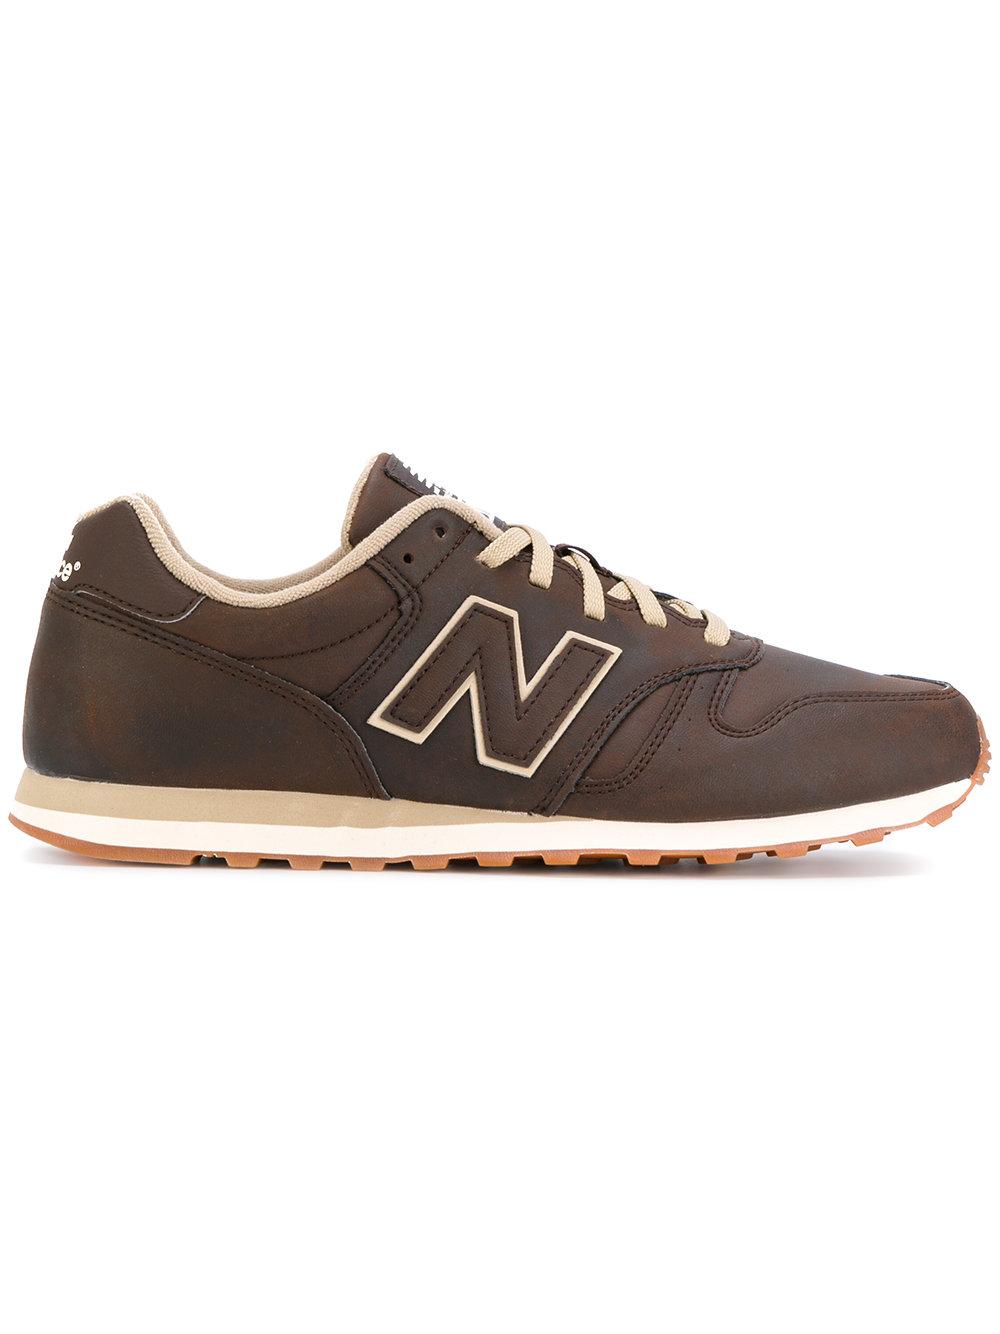 New Balance Leather Ml 372 Sneakers in Red for Men - Lyst